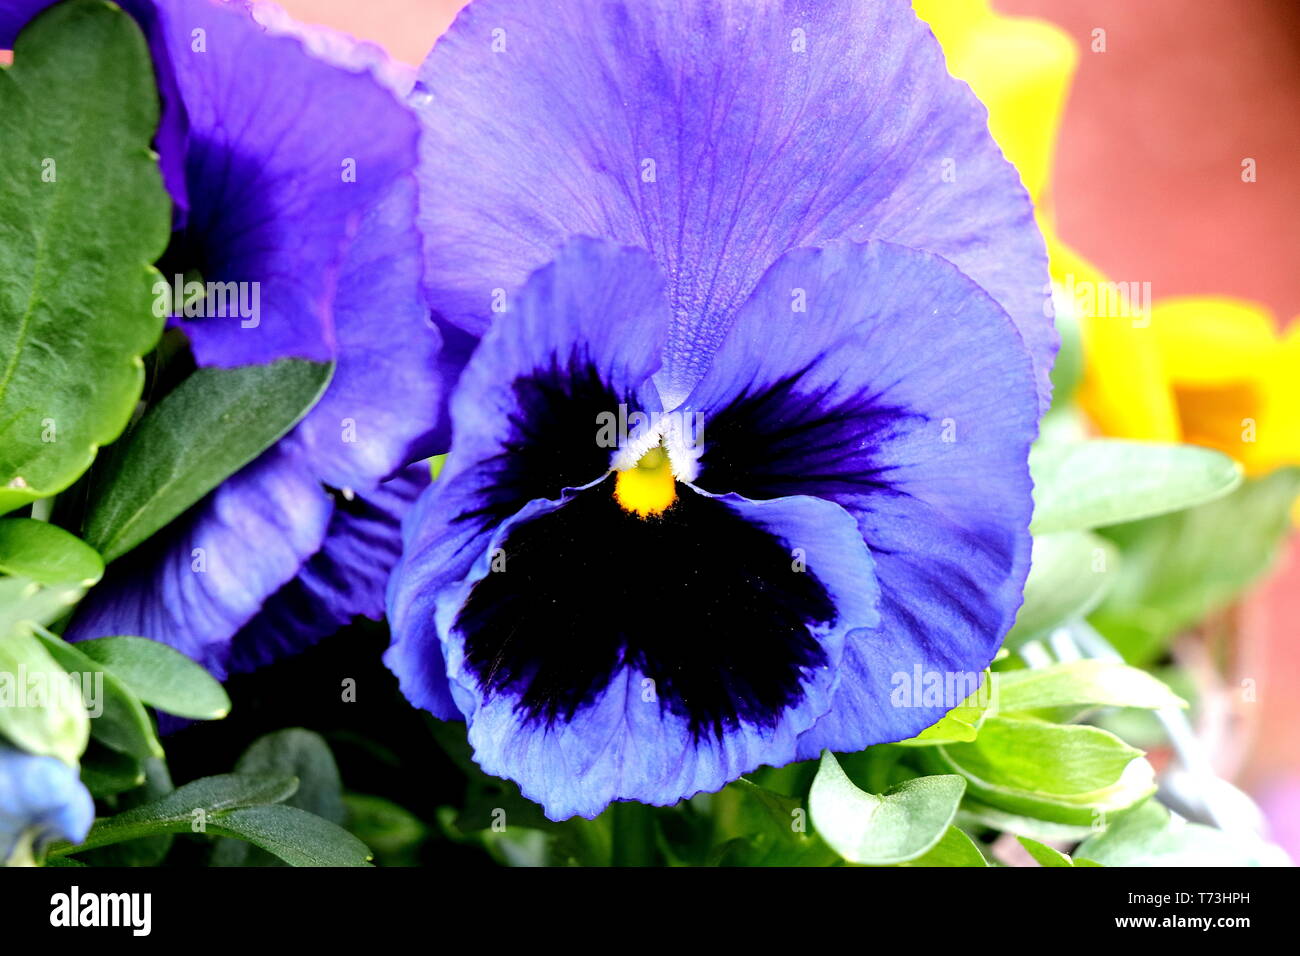 Garden pansy, Giant Pansy, Viola, or hartsease, a hybrid plant cultivated as a garden flower, particularly Viola tricolor, a wildflower of Europe Stock Photo